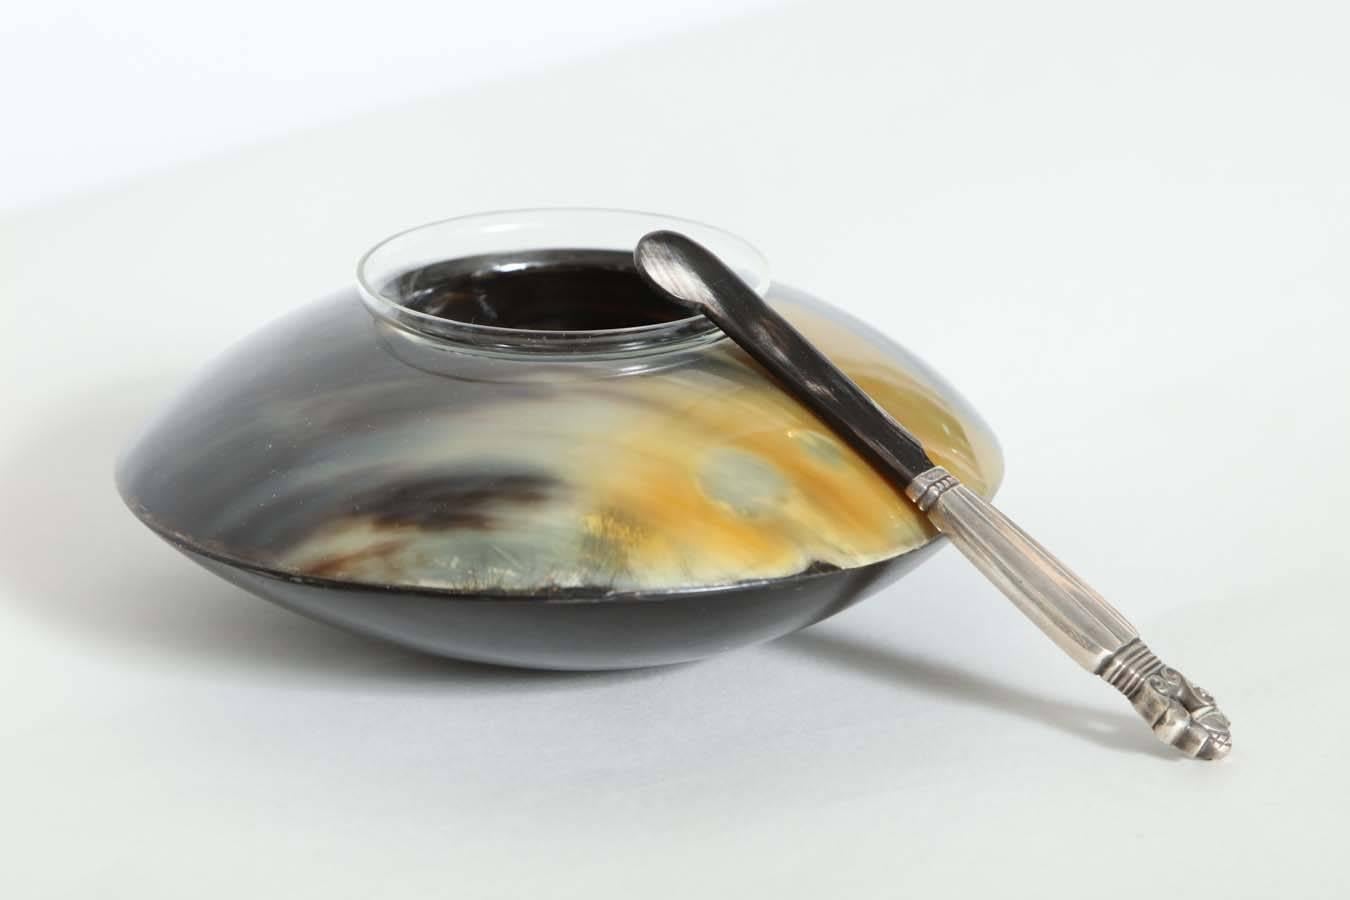 A wonderful caviar server with glass insert and Jensen Acorn pattern sterling caviar knife with Horn blade (5.75